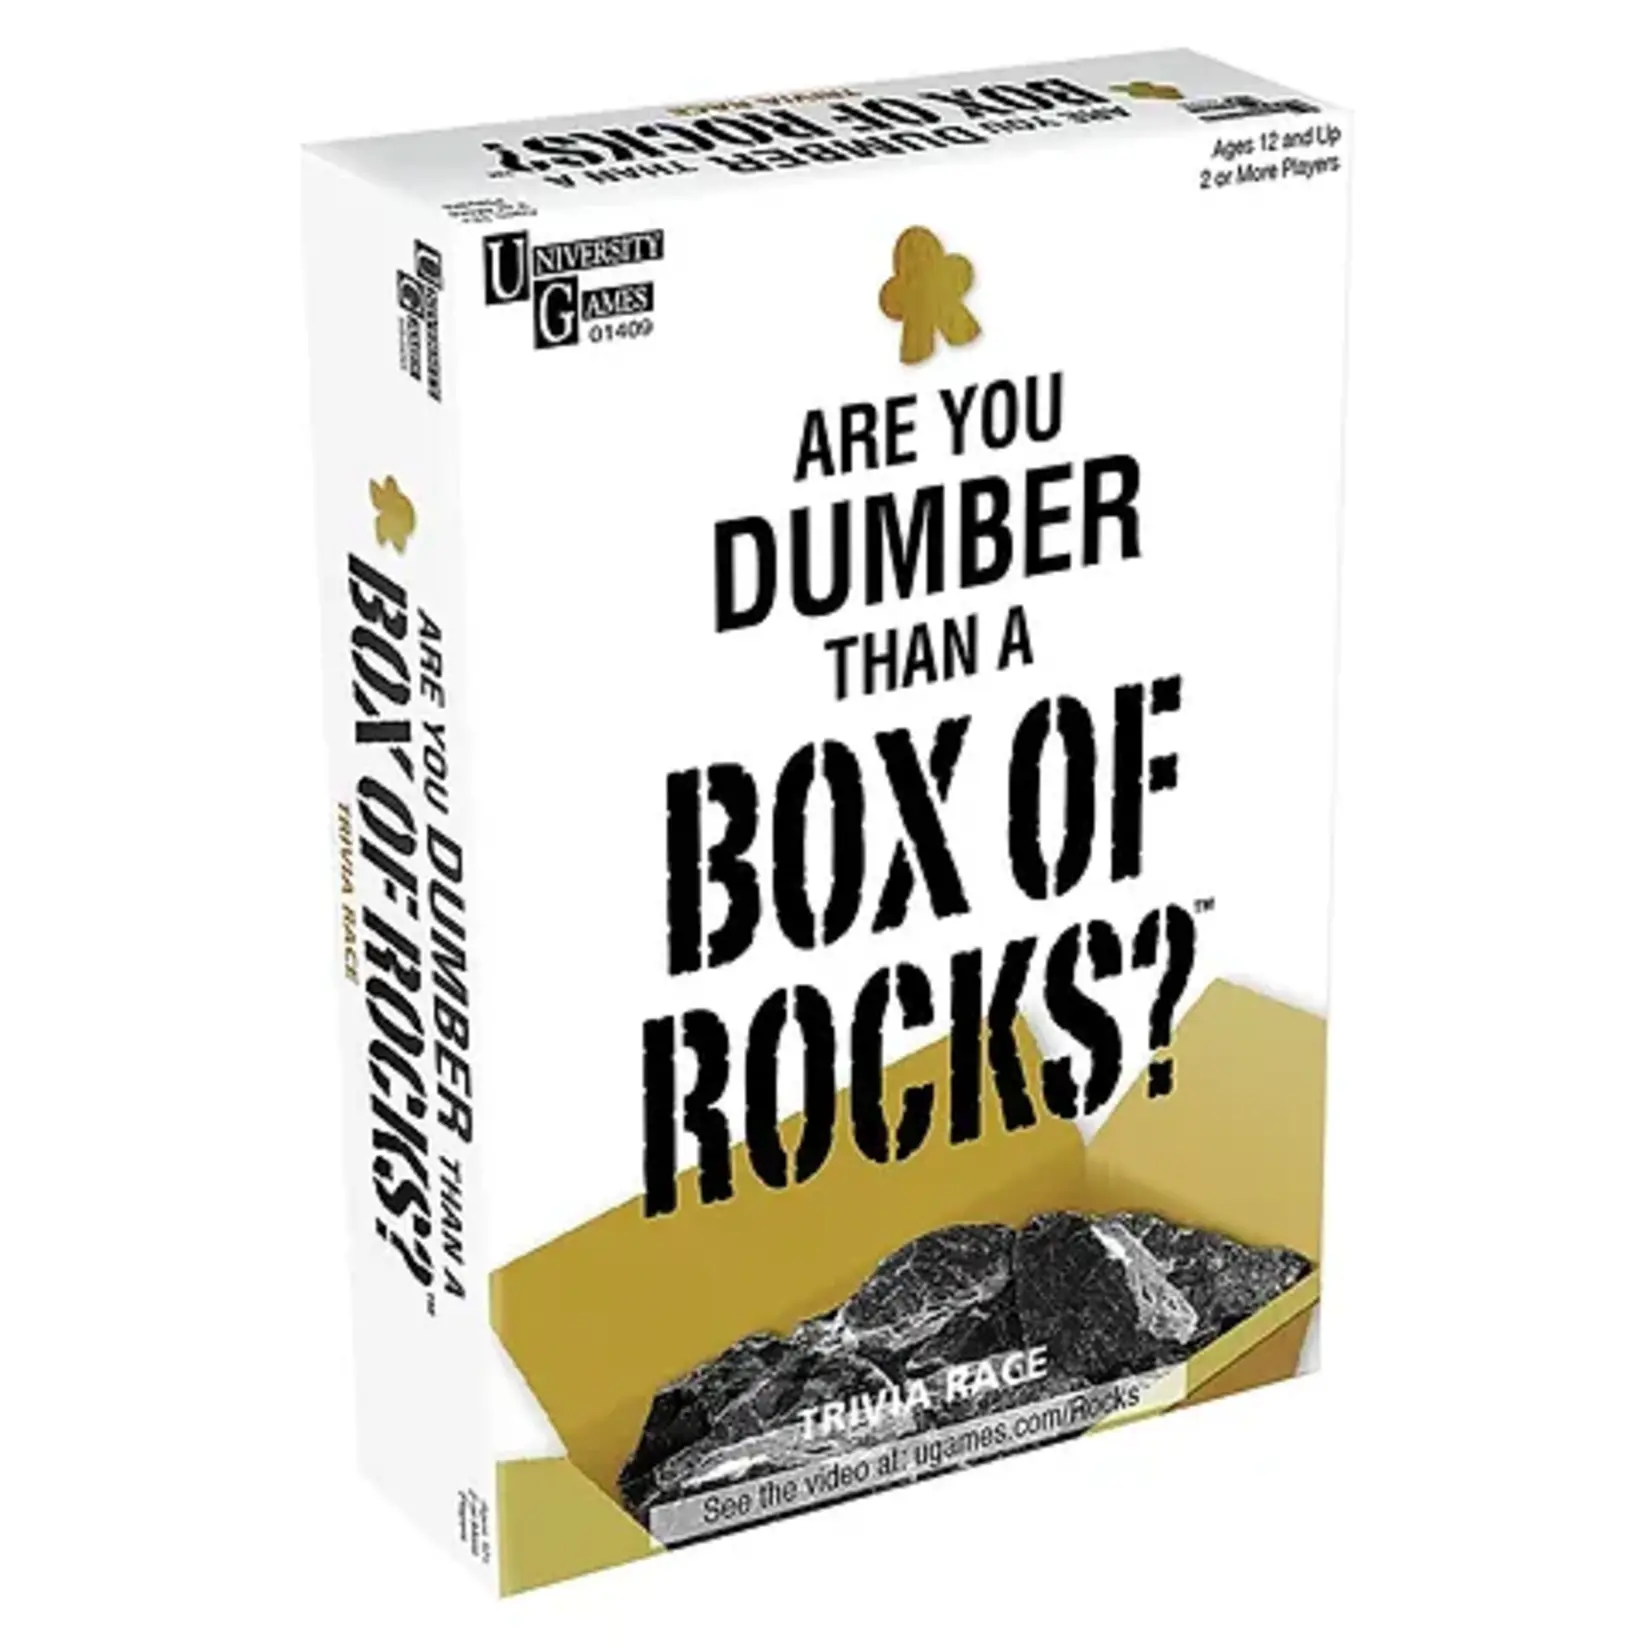 University Games Are you dumber than a box of rocks?